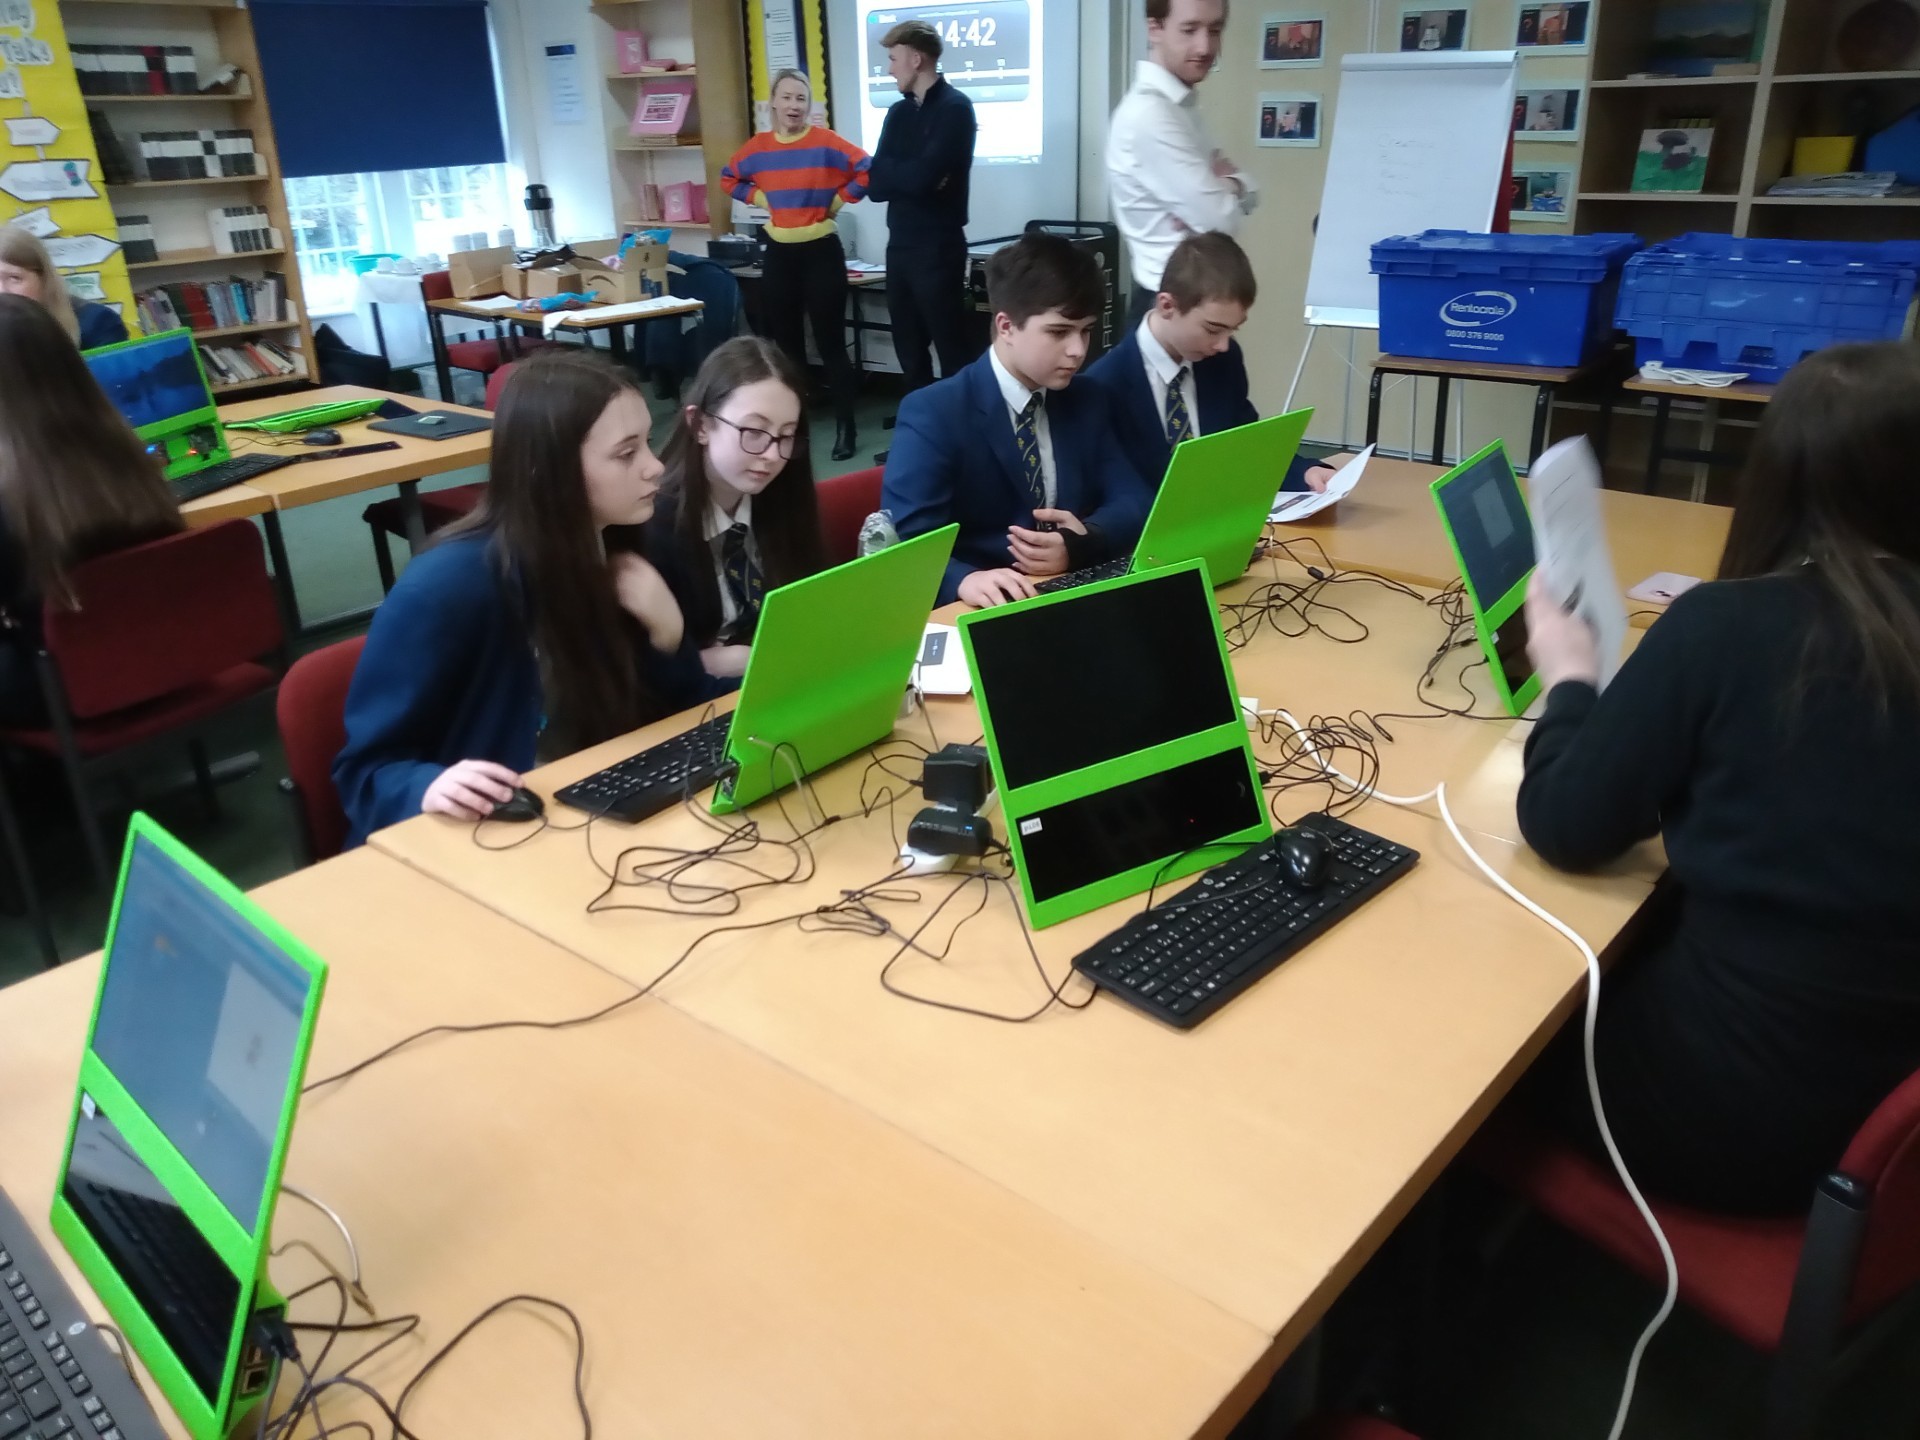 Students at Ysgol Rhiwabon during the Bank of America IT event.